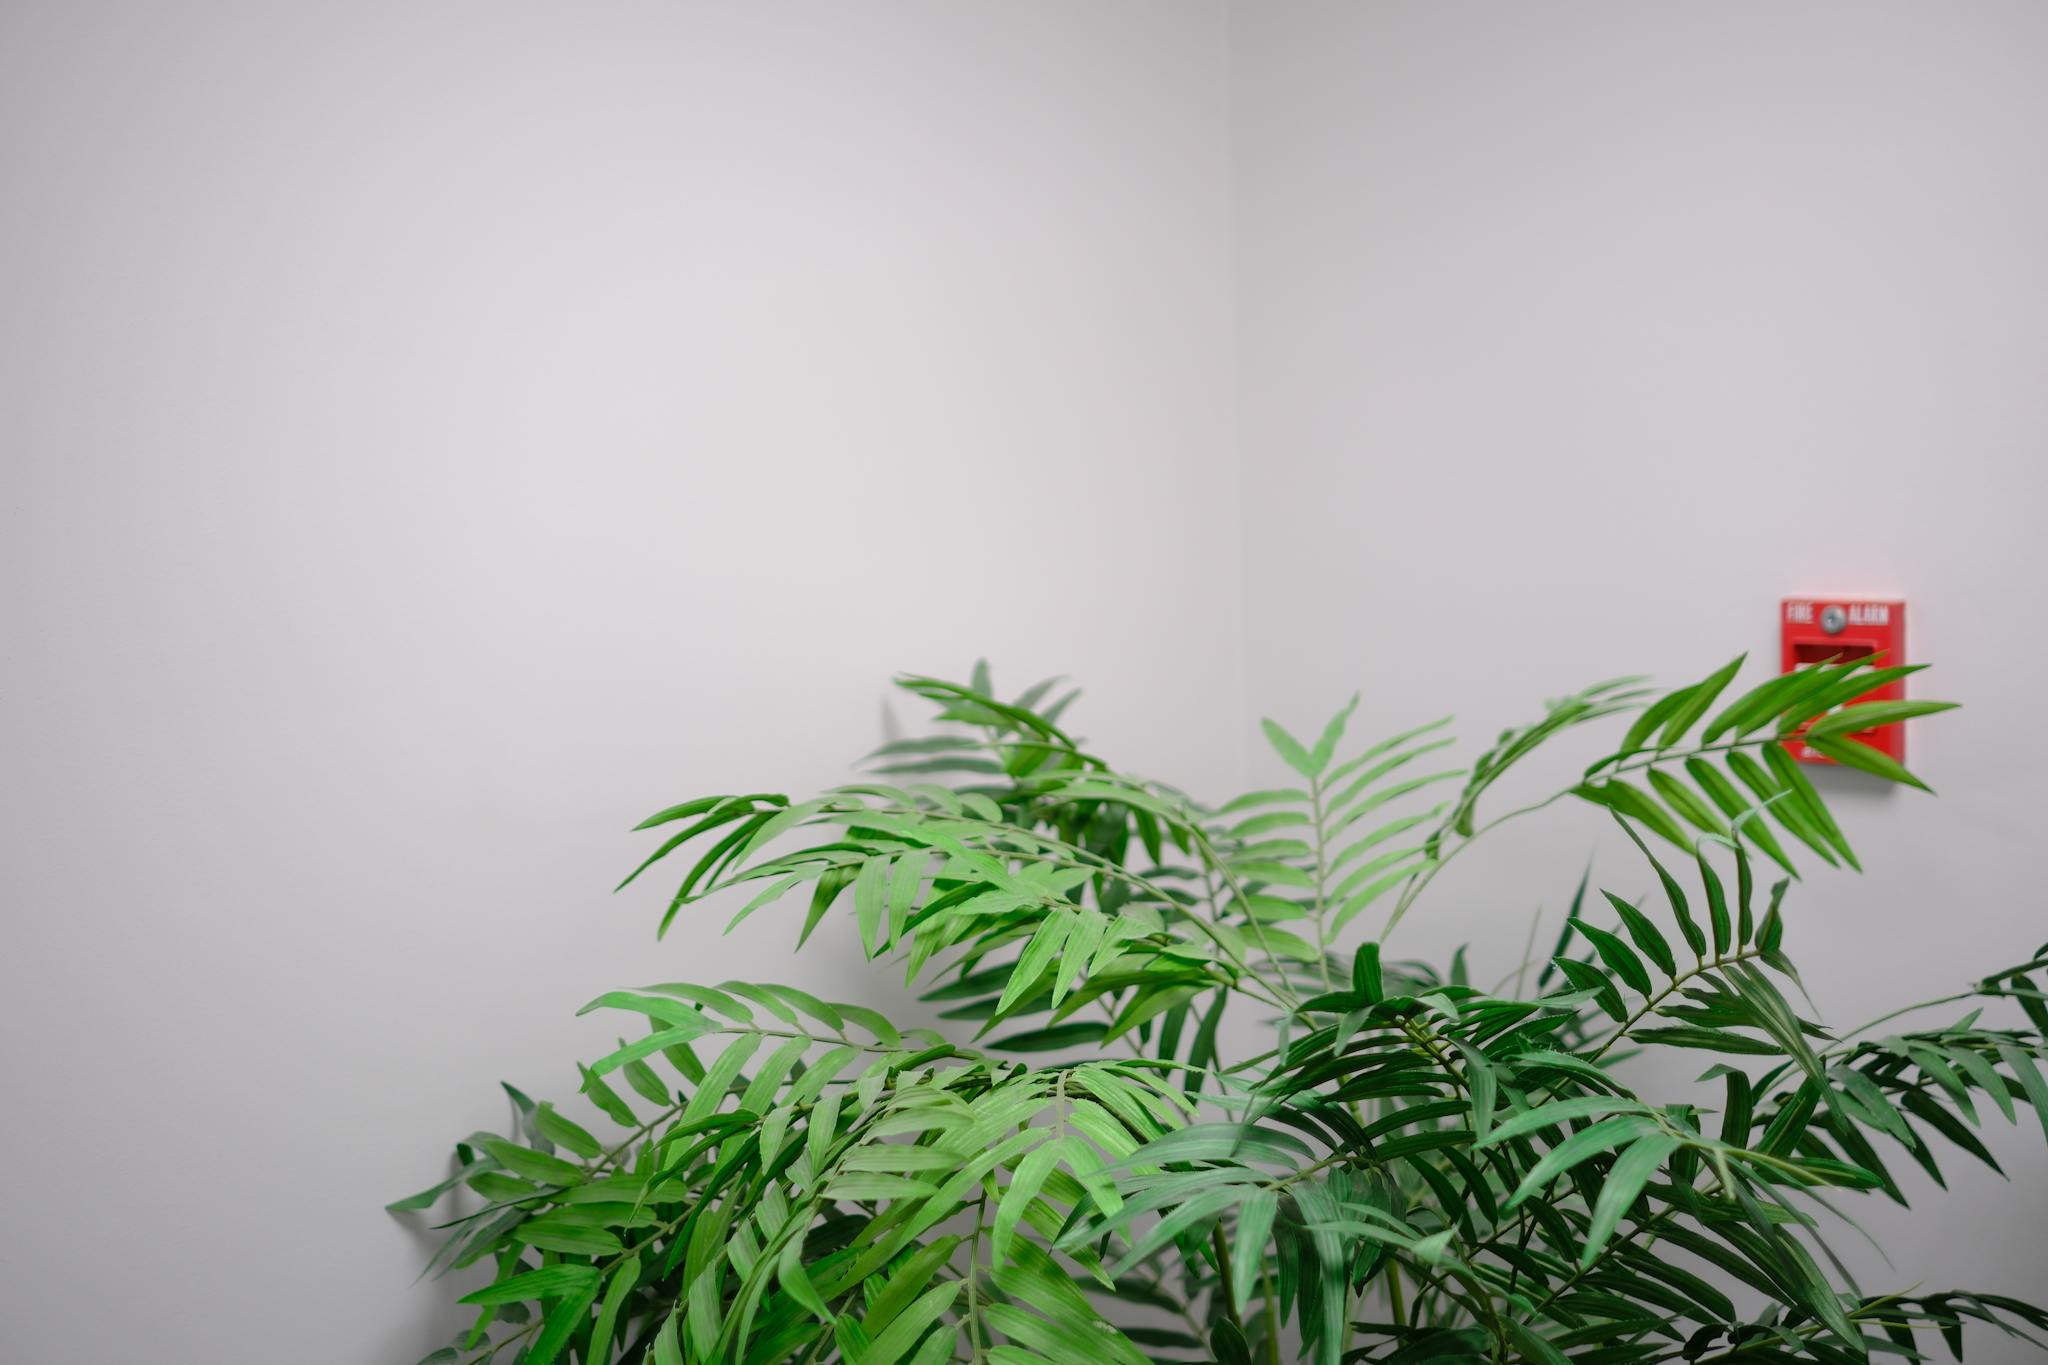 A green potted fern sits against a white wall with a small red object on the upper right corner